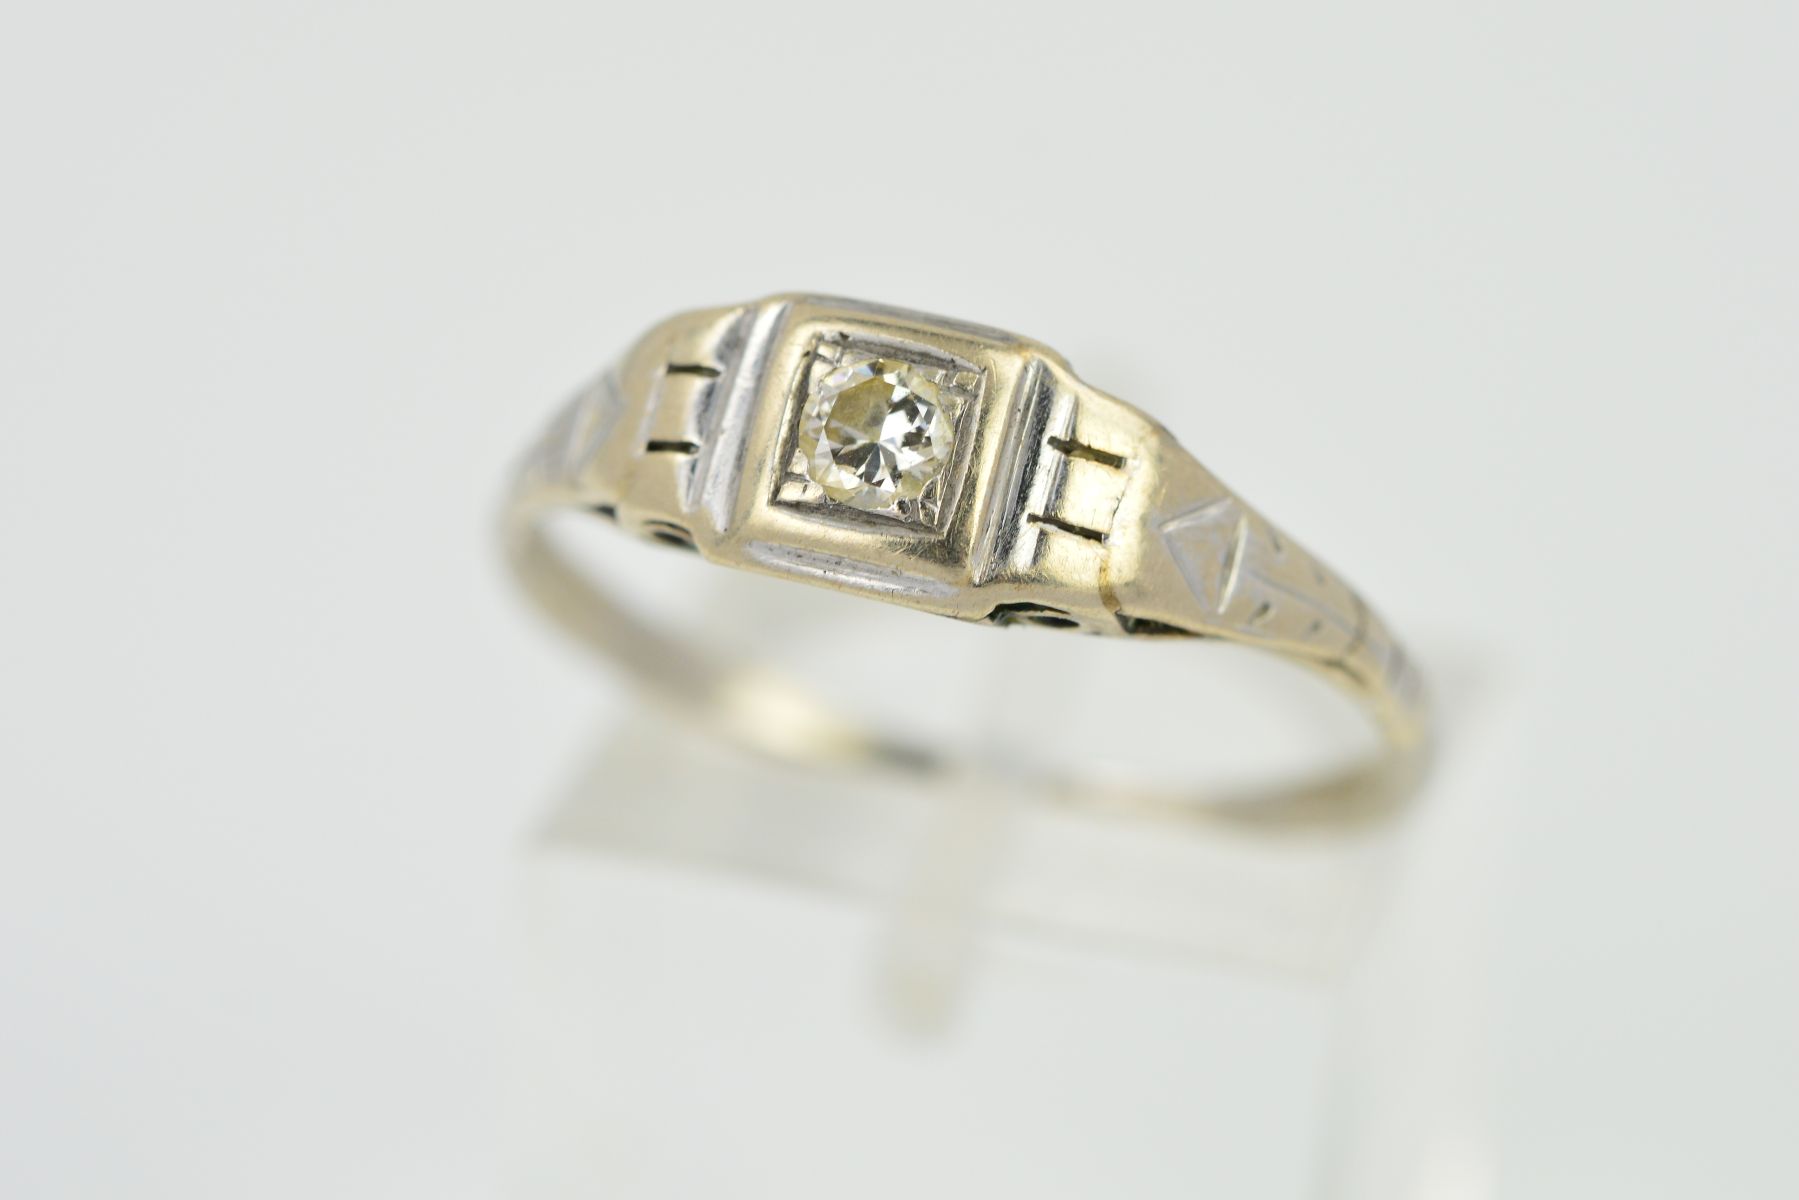 AN EARLY 20TH CENTURY DIAMOND SINGLE STONE RING, a brilliant cut diamond claw set within a square